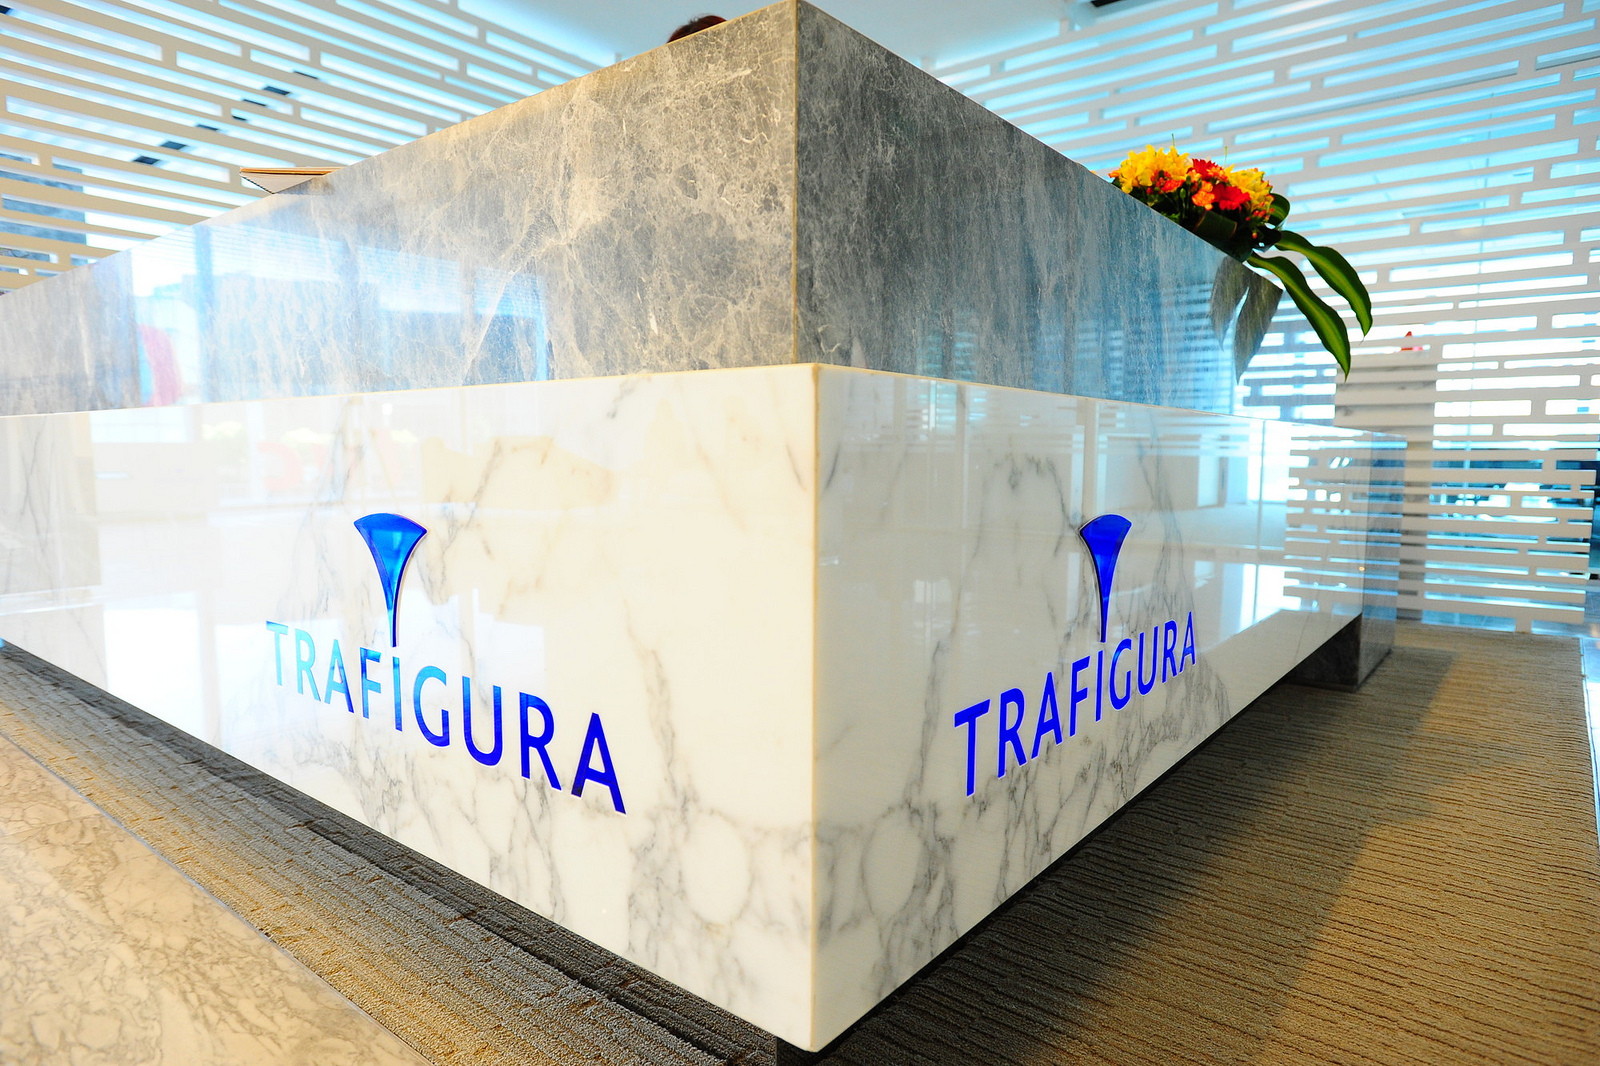 Commodity firm Trafigura jumps into chemical trading with new JV